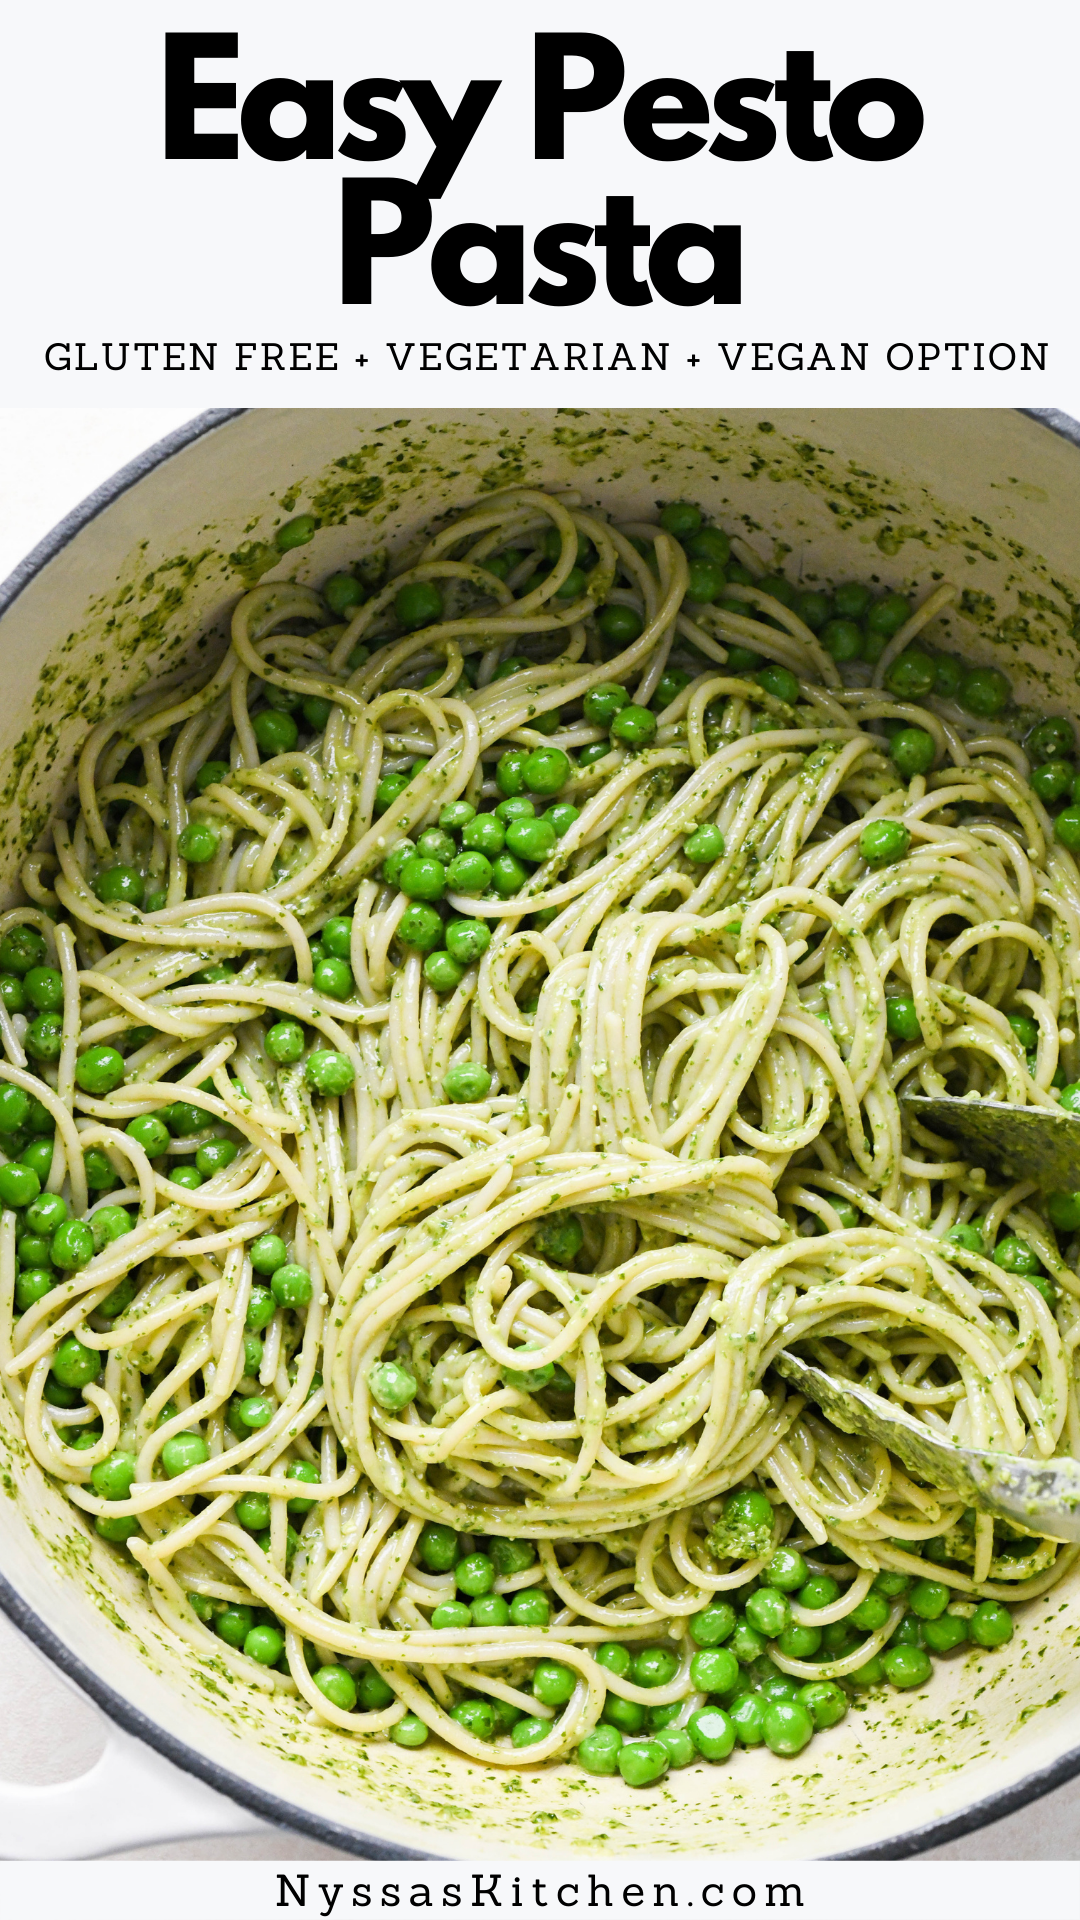 Easy pesto pasta is the perfect weeknight recipe! It's ready in less than 30 minutes and full of bold flavors. Option to make it dairy free / vegan, and customize it with whatever protein or veggies you like! Gluten free, vegetarian, vegan option.